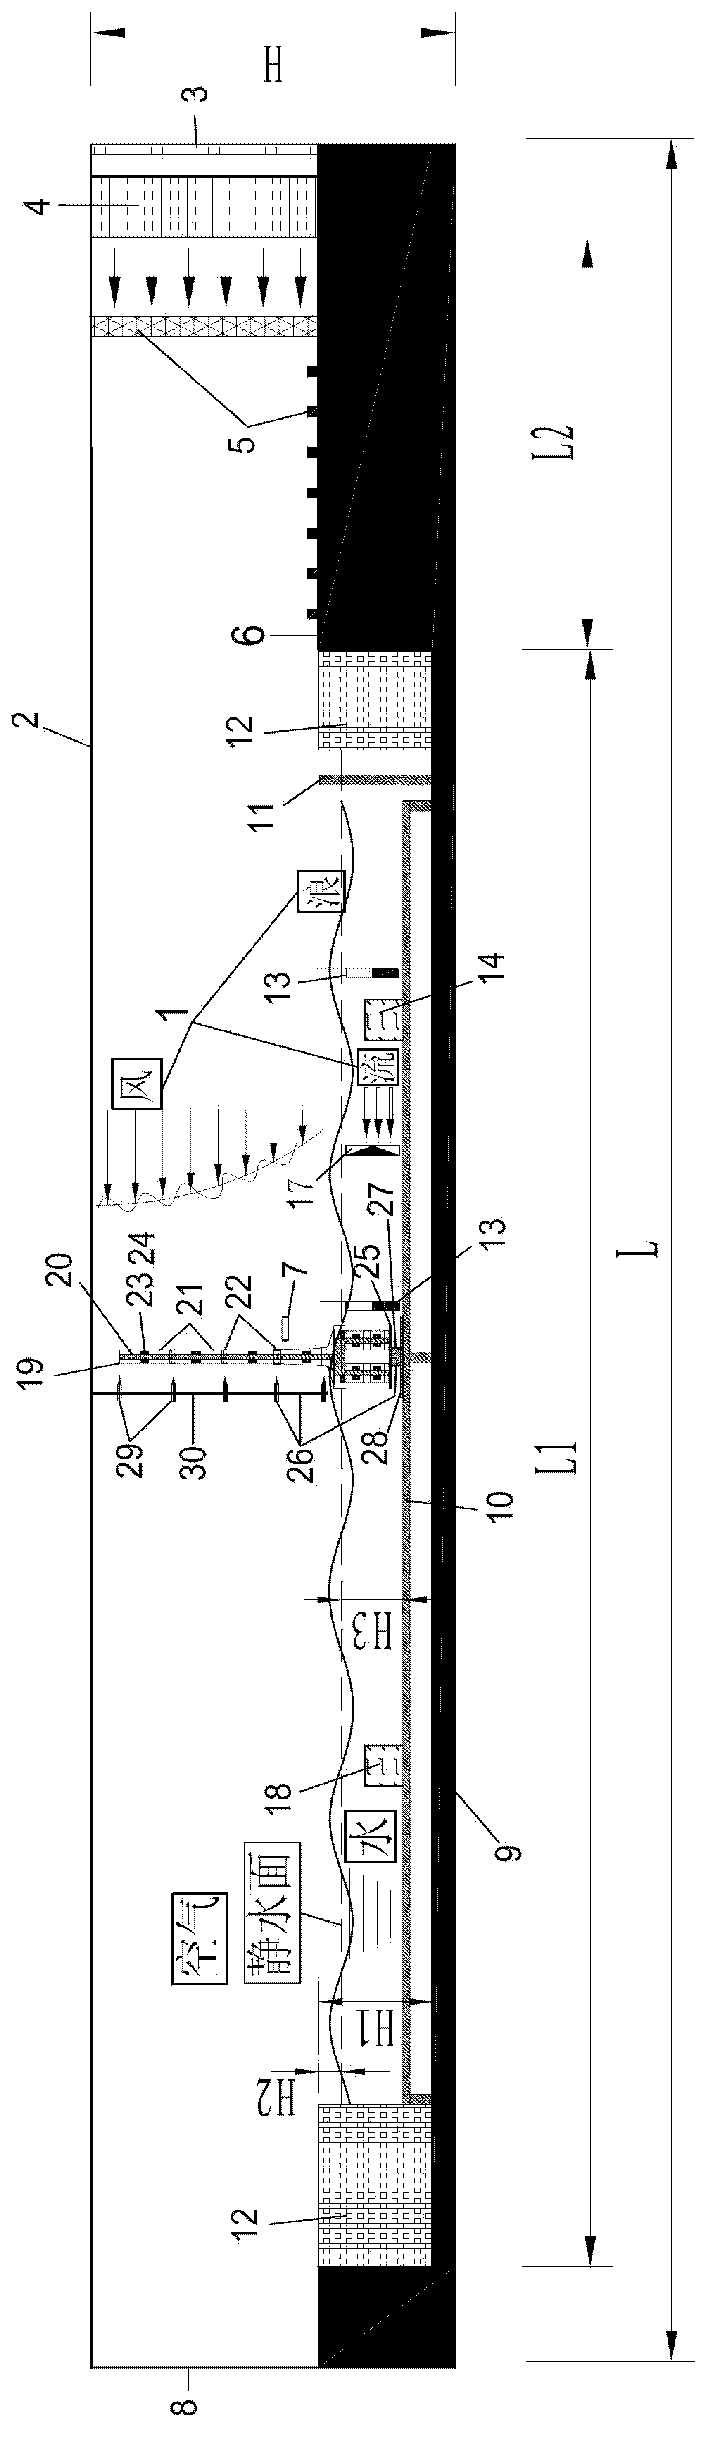 Bridge wind wave and flow coupling field, elastic model and dynamic response experiment test system